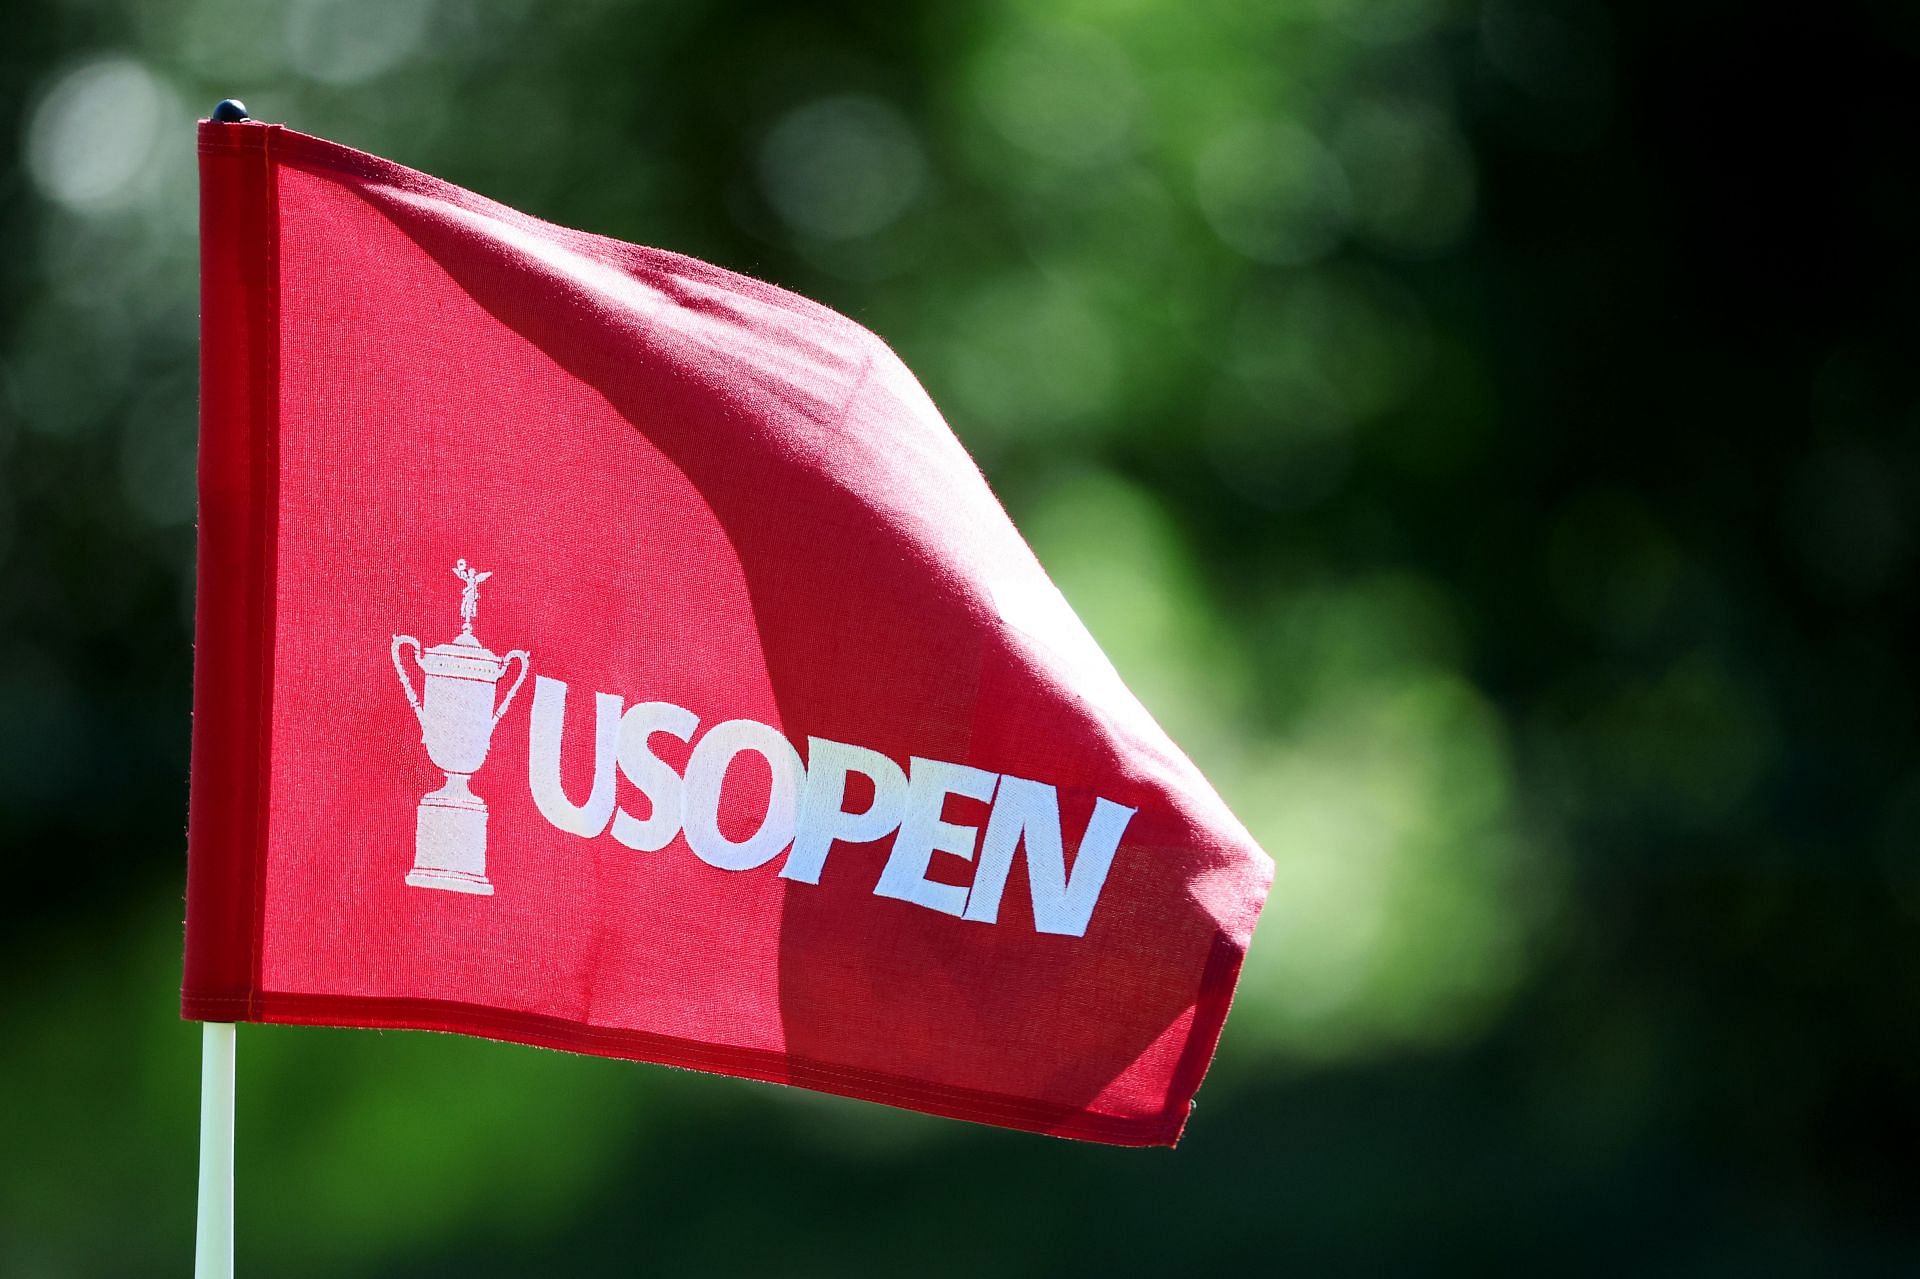 US Open - Preview Day 2